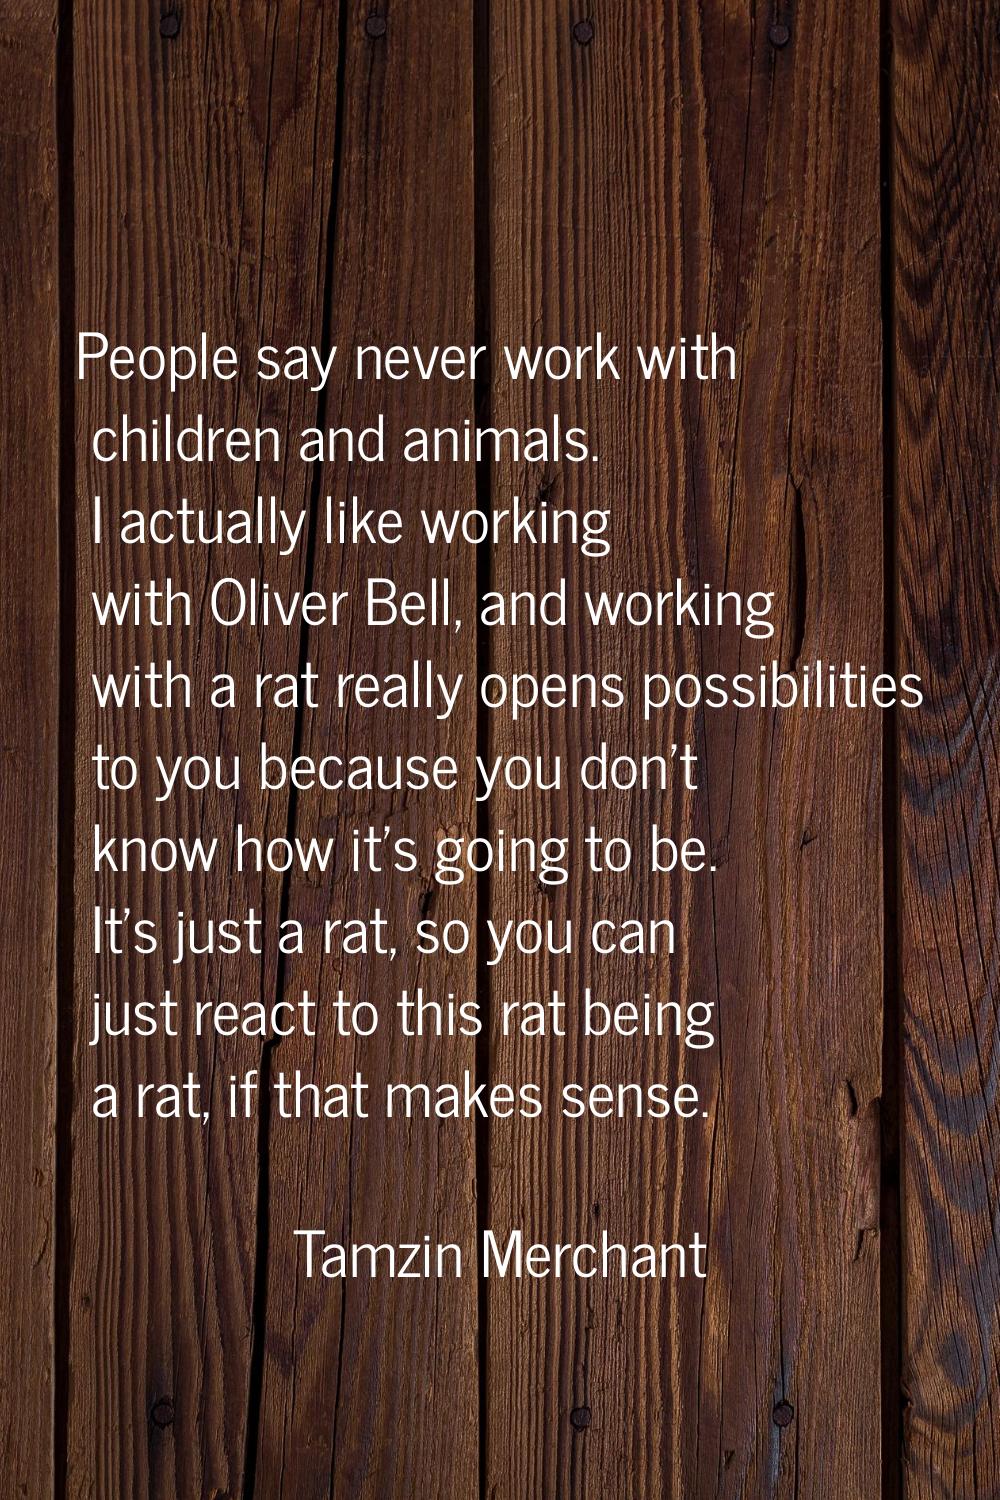 People say never work with children and animals. I actually like working with Oliver Bell, and work